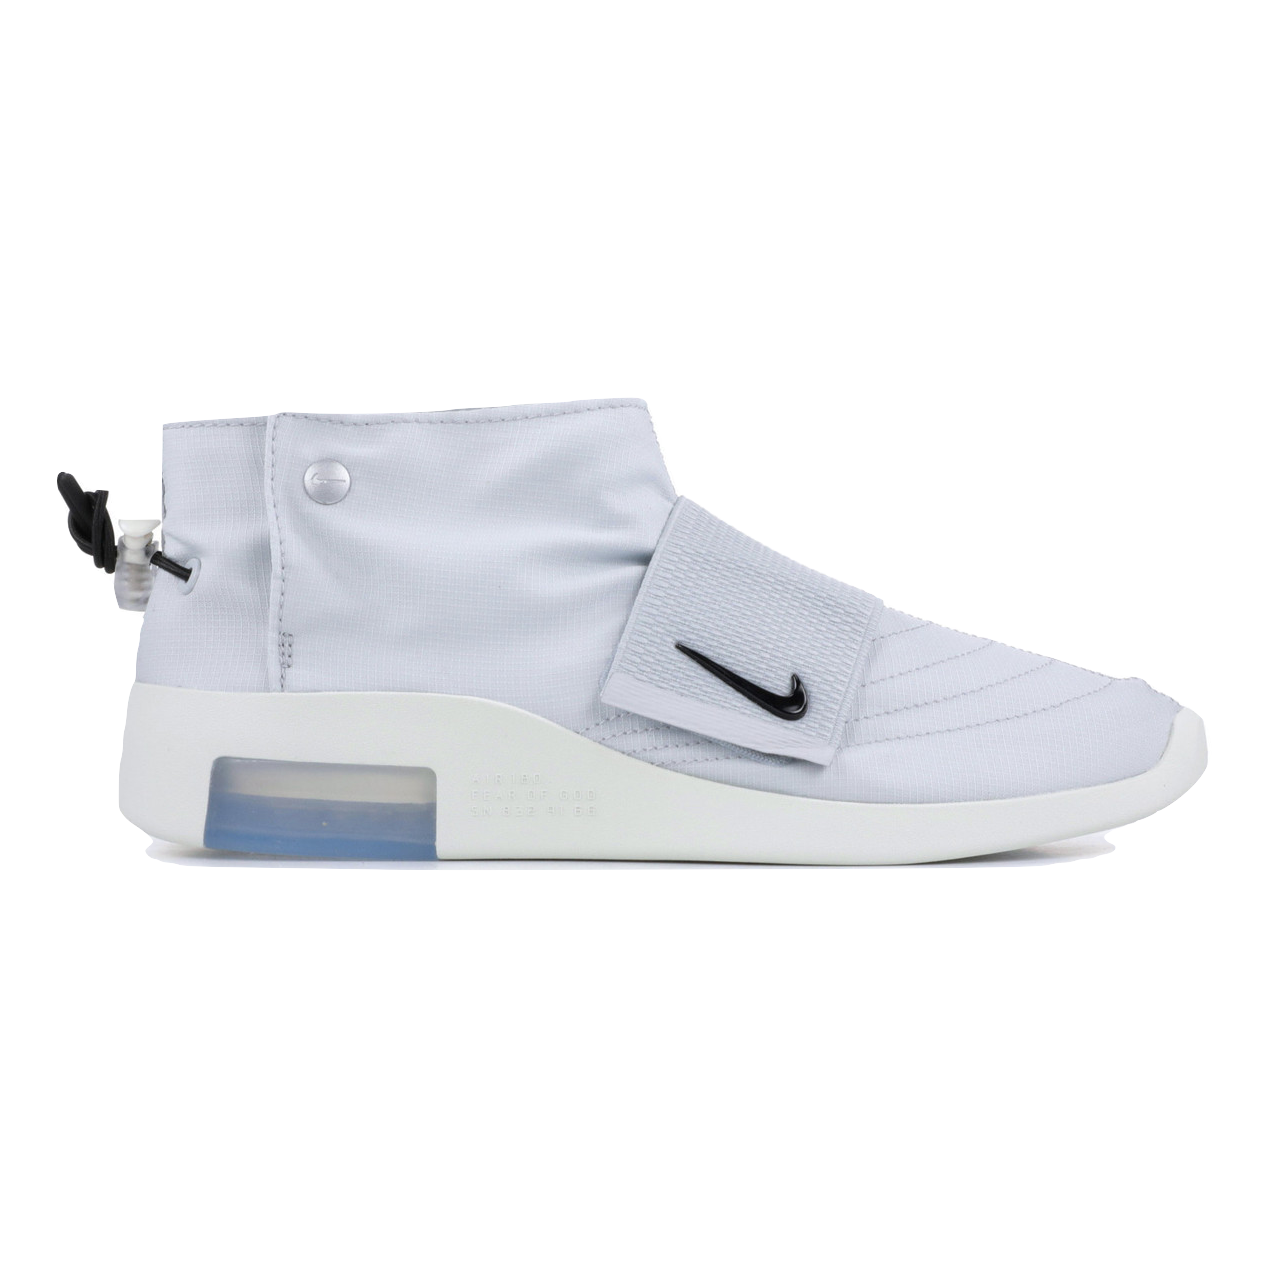 Nike Air Fear Of God Moccasin - Pure Platinum - Used